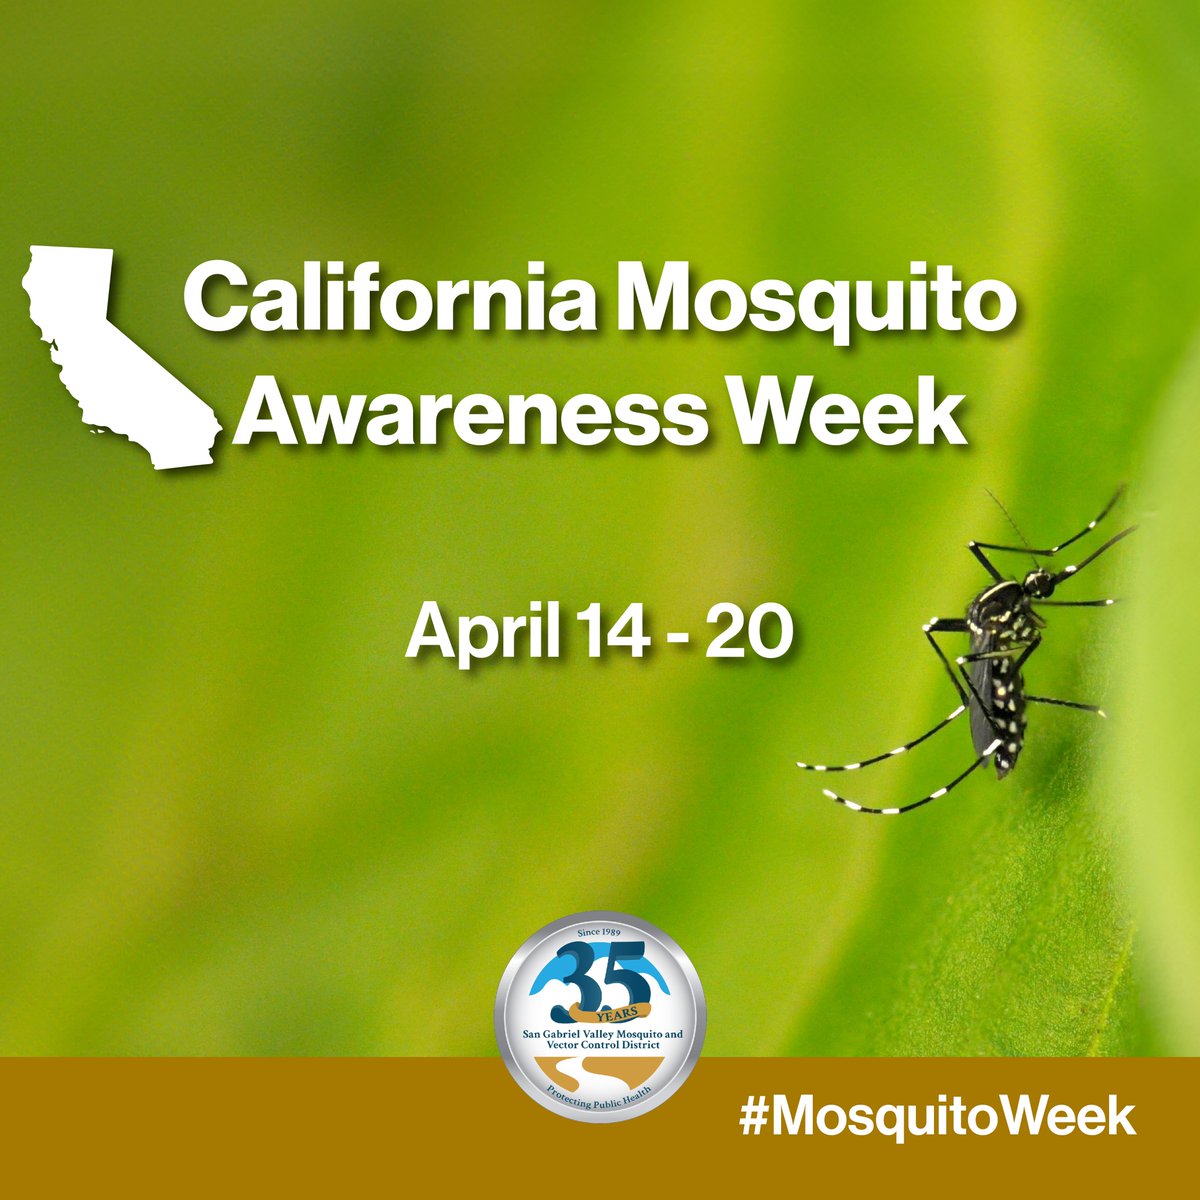 🦟 It's California Mosquito Awareness Week!
Mosquitoes are the world's deadliest animal, causing millions of deaths each year through diseases like malaria, dengue, and Zika.

Stay informed, stay safe!

MosquitoAwareness.org

#LaPuente #MosquitoWeek #SGVmosquito35th #community